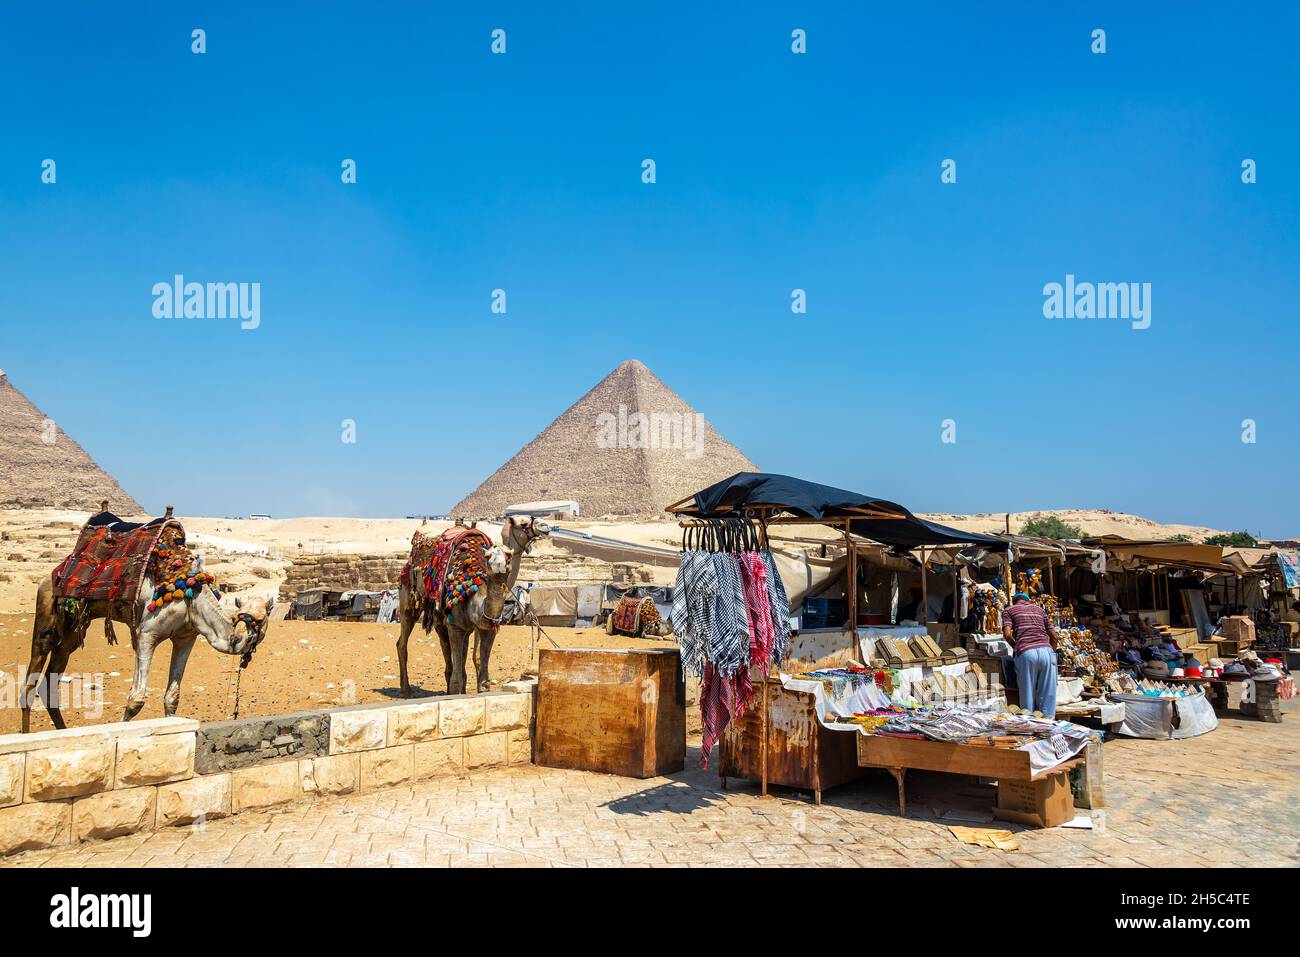 GIZA, EGYPT - JULY 14, 2021: Camels and vendors near the Great Pyramid in Giza, Egypt Stock Photo